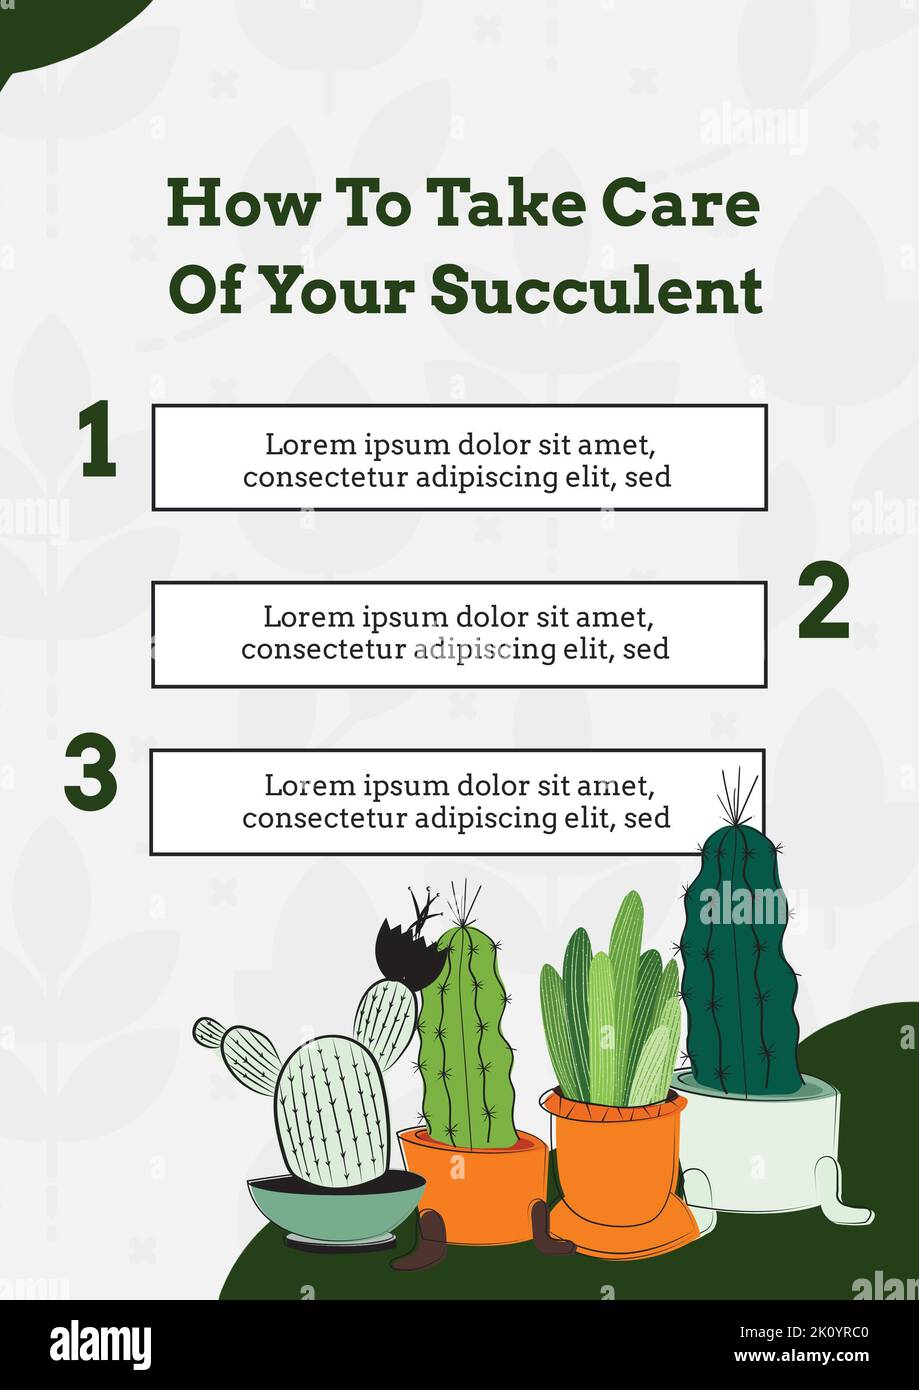 Composition of how to take care of your succulent text with cactus icons on white background Stock Photo